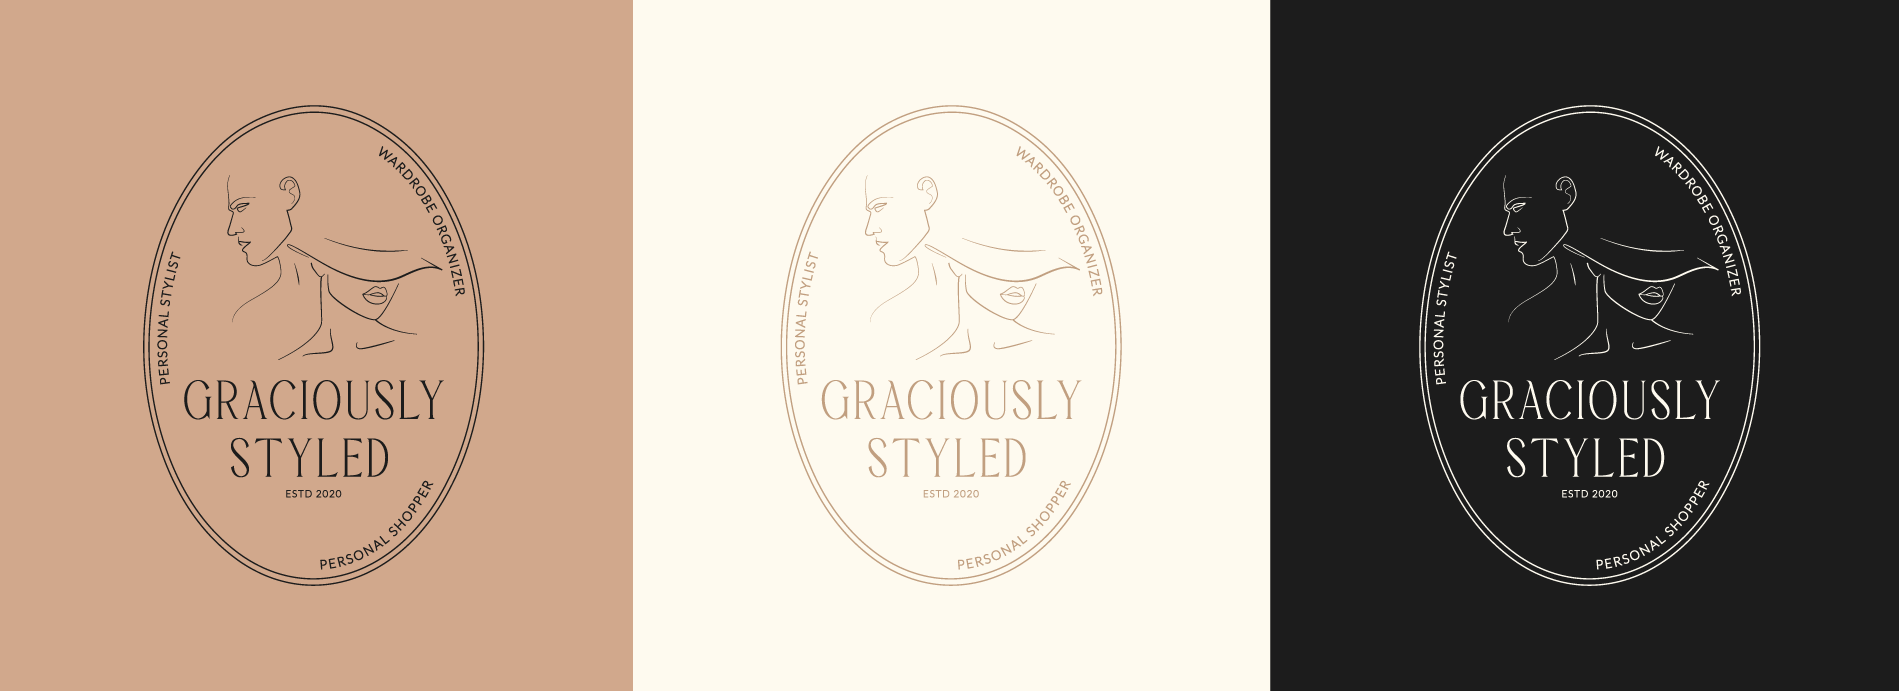 Graciously Styled